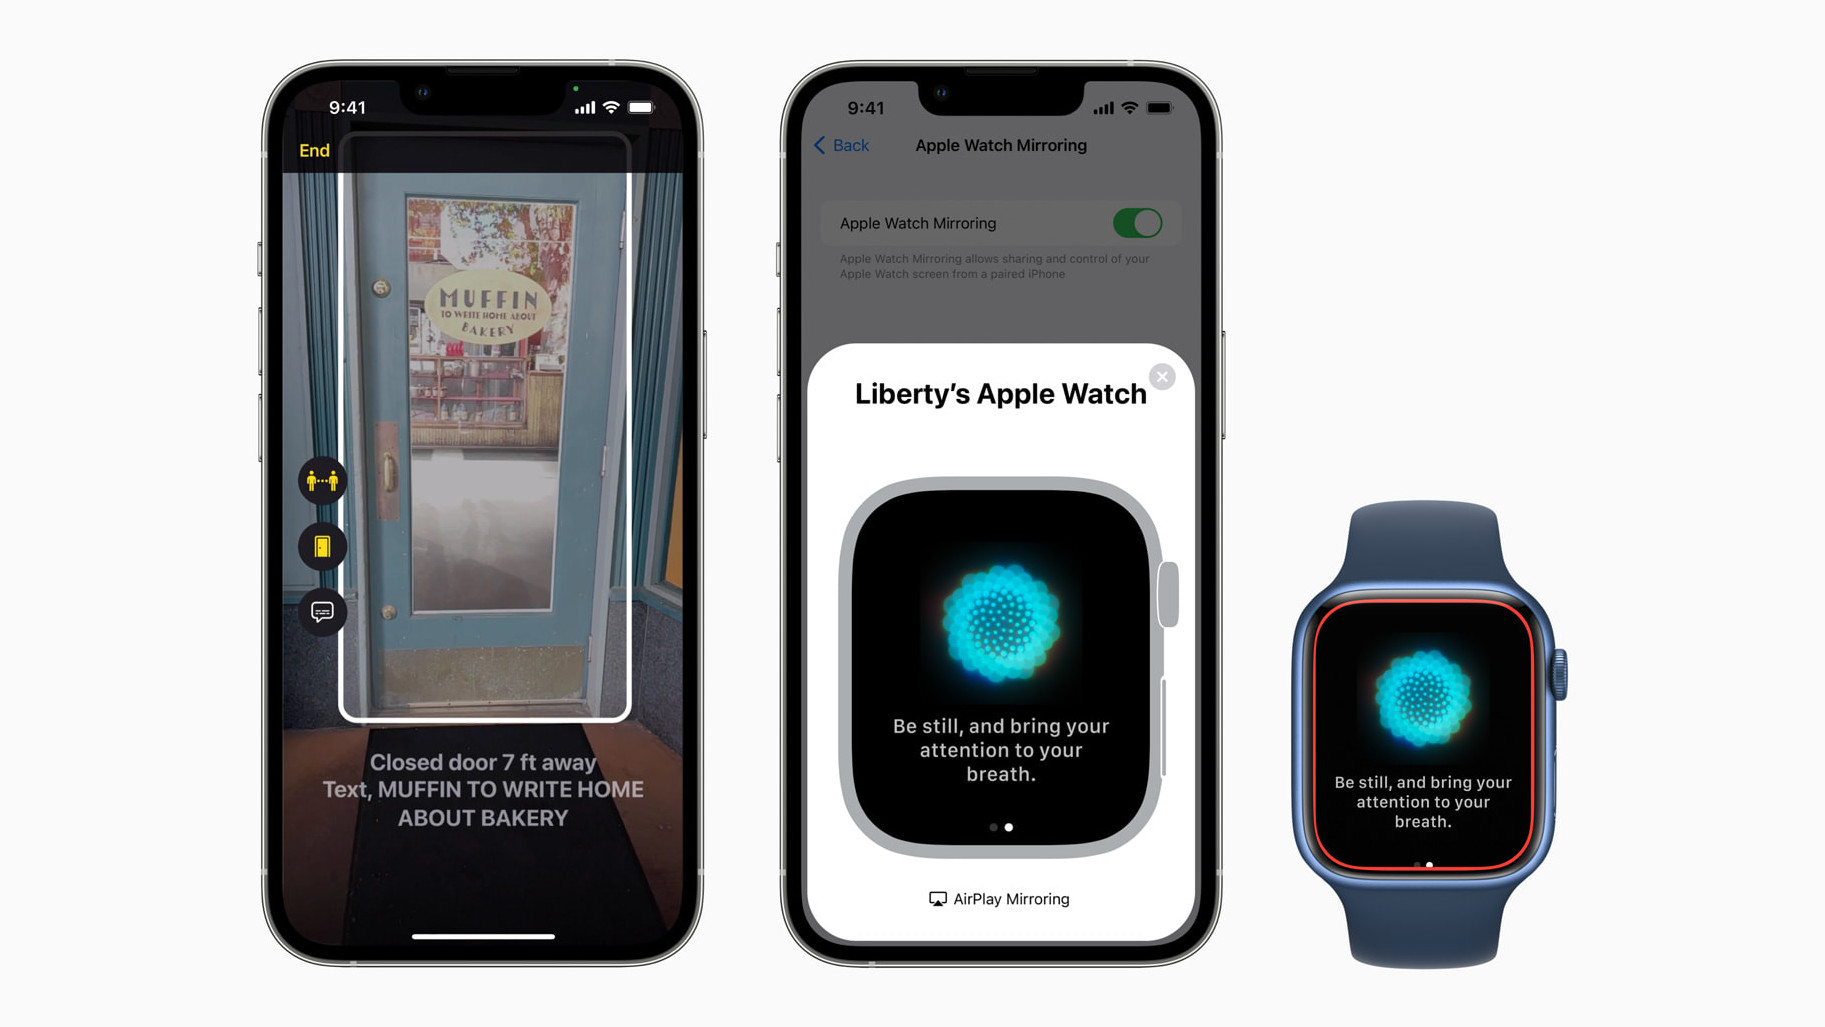 Apple Accessibility Features shown on iPhone and Apple Watch